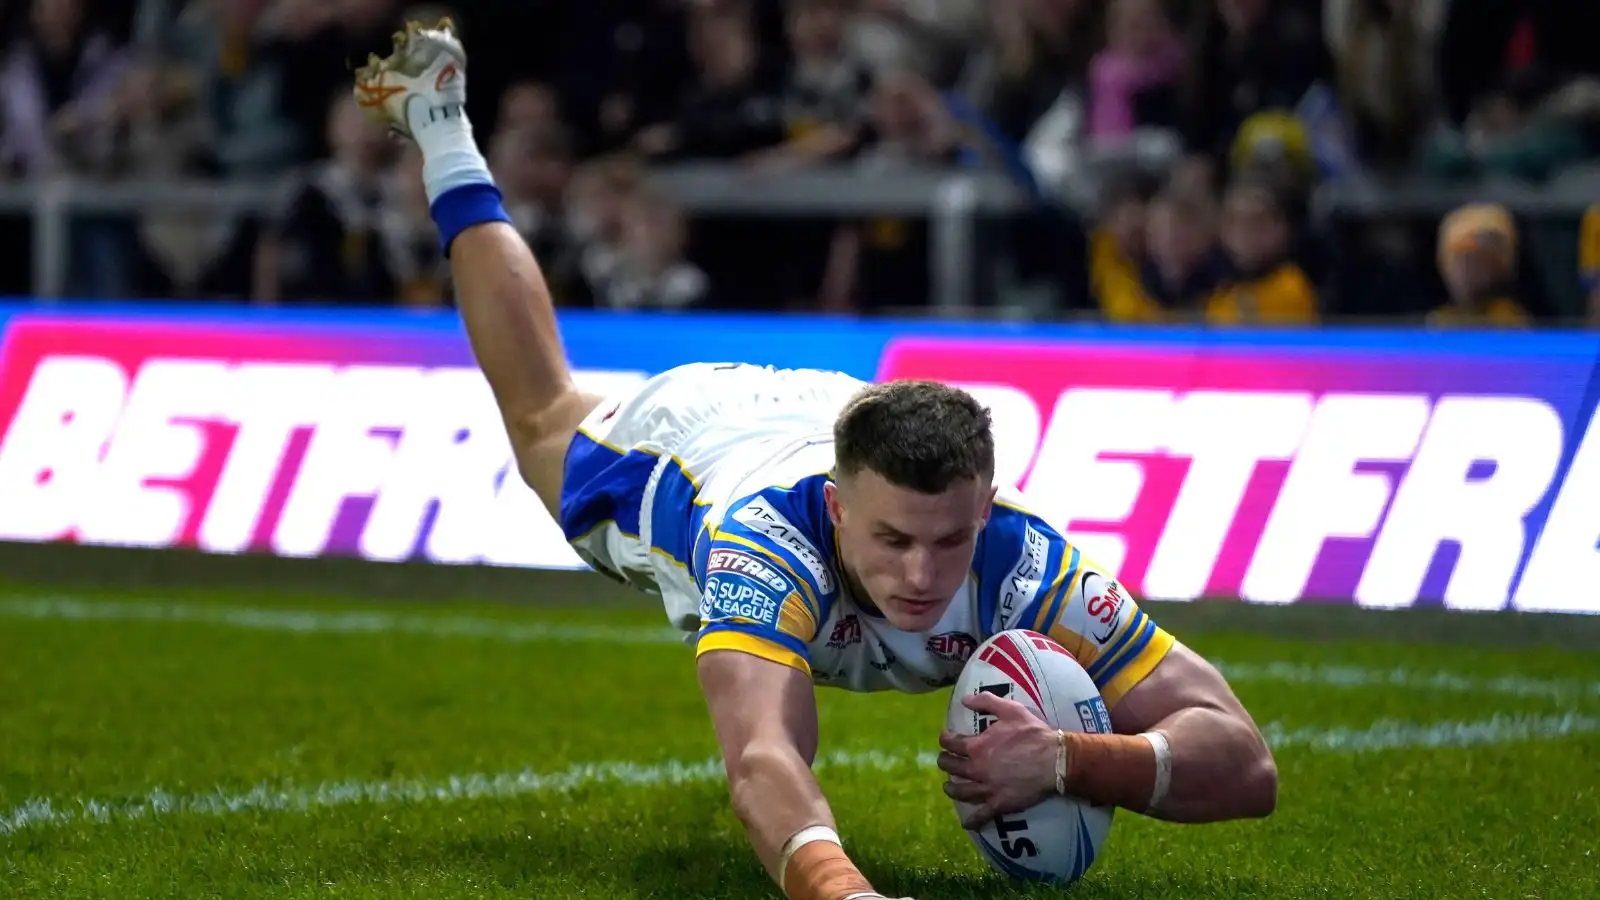 Top try, goal & points scorers in Super League, Championship & League 1 as Huddersfield Giants winger leads the way